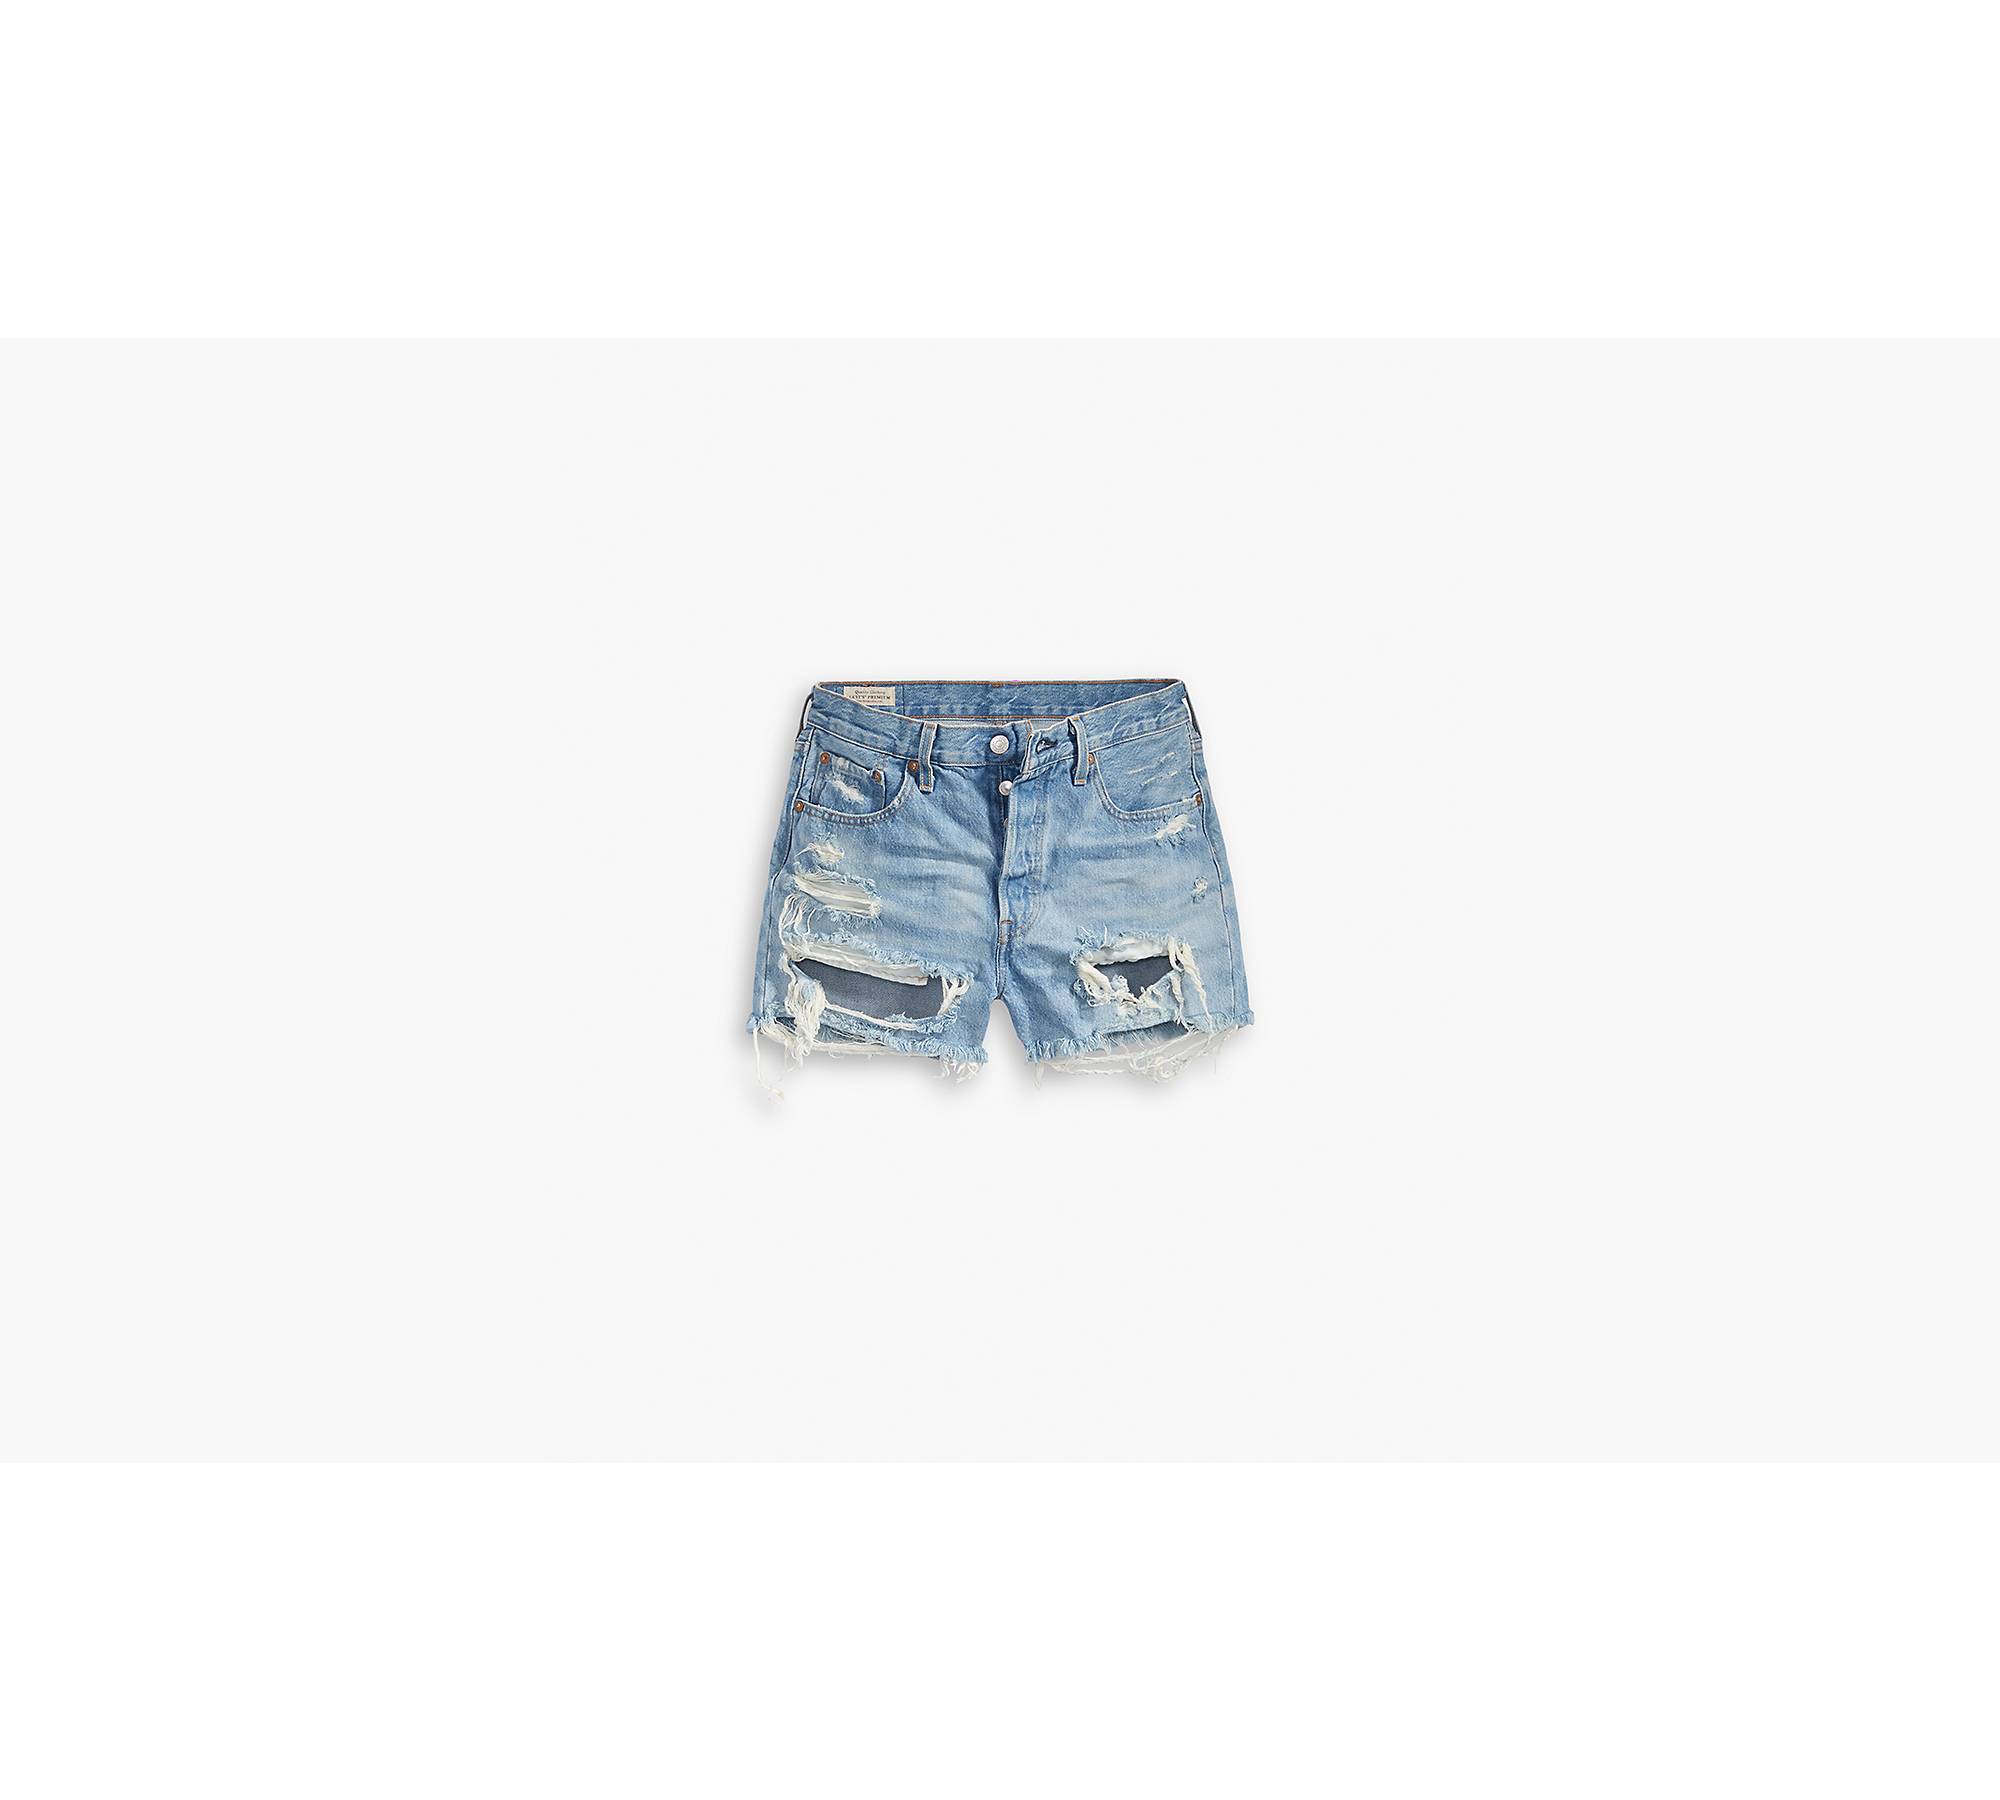 High-Waisted OG Straight Ripped Jean Shorts for Women -- 3-inch inseam